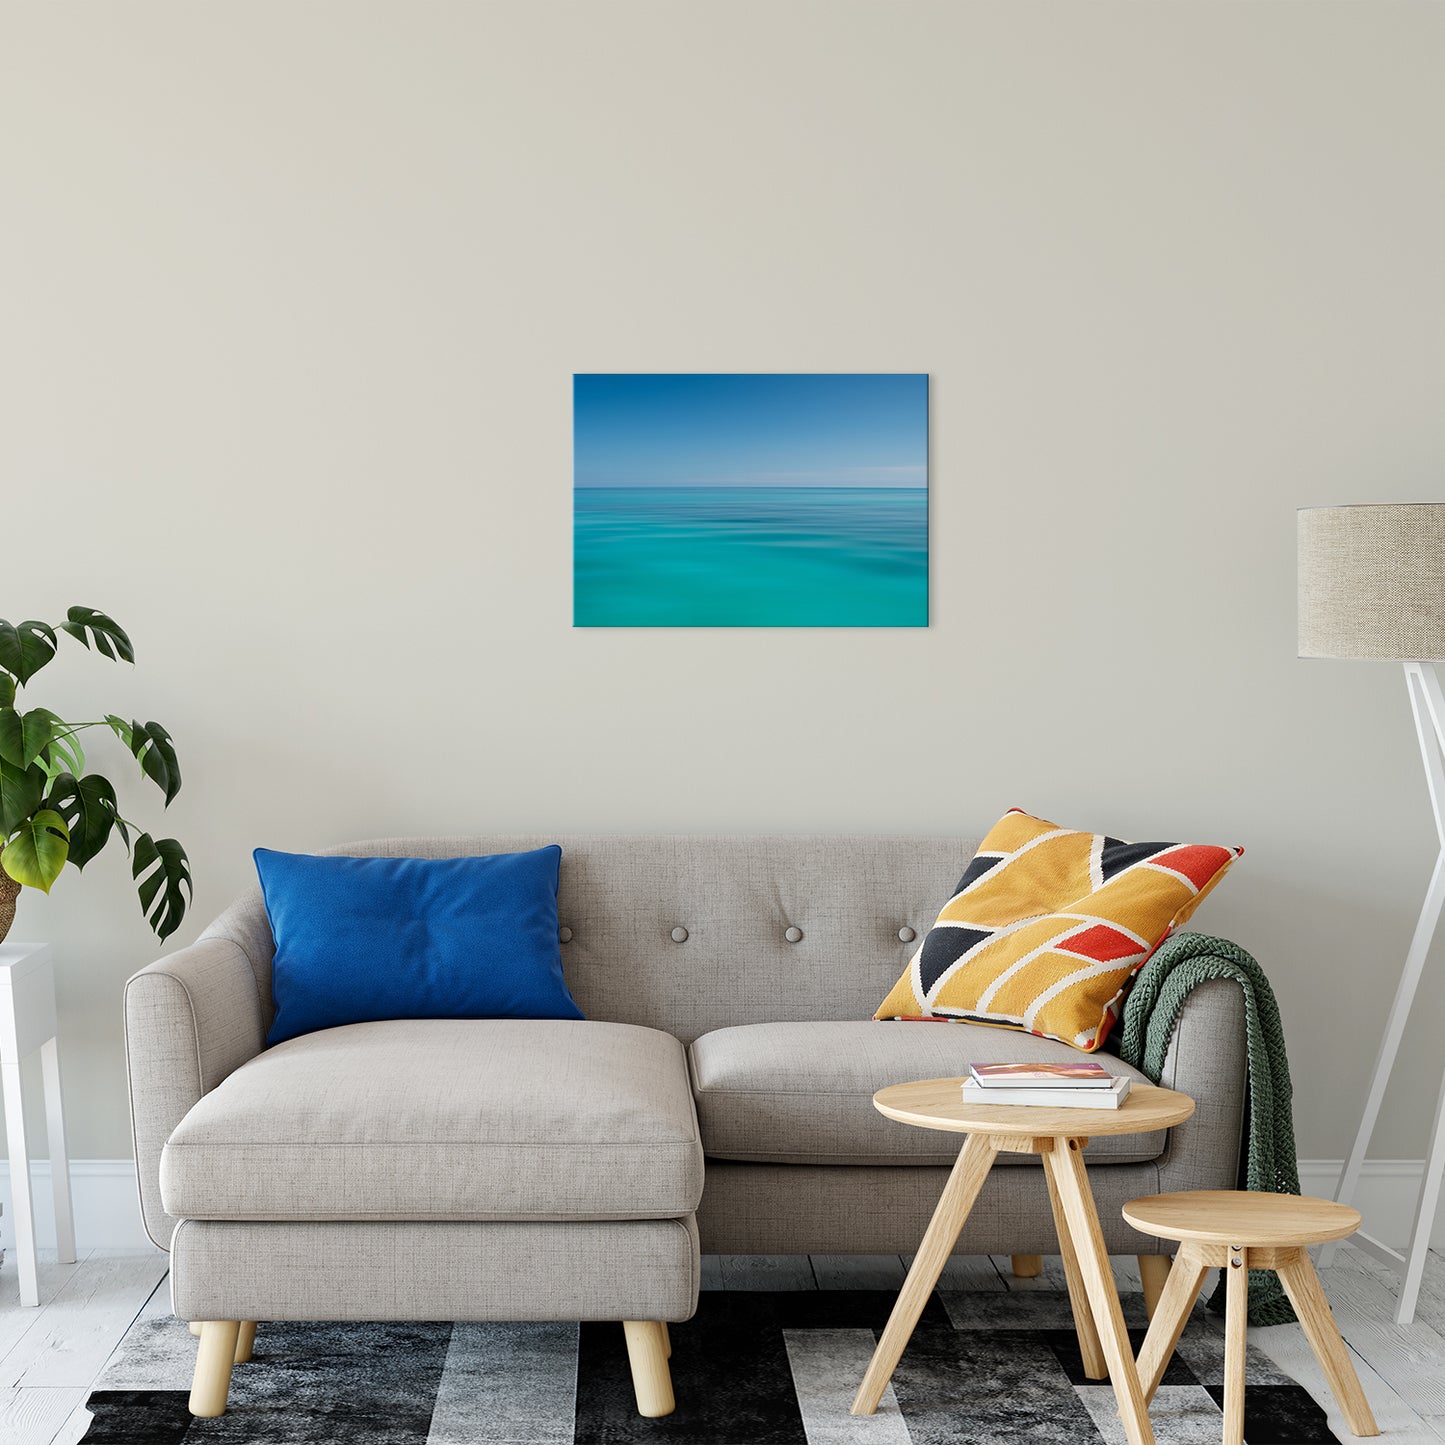 Colors of The Tropical Sea Abstract Coastal Landscape Fine Art Canvas Prints 20" x 24" - PIPAFINEART